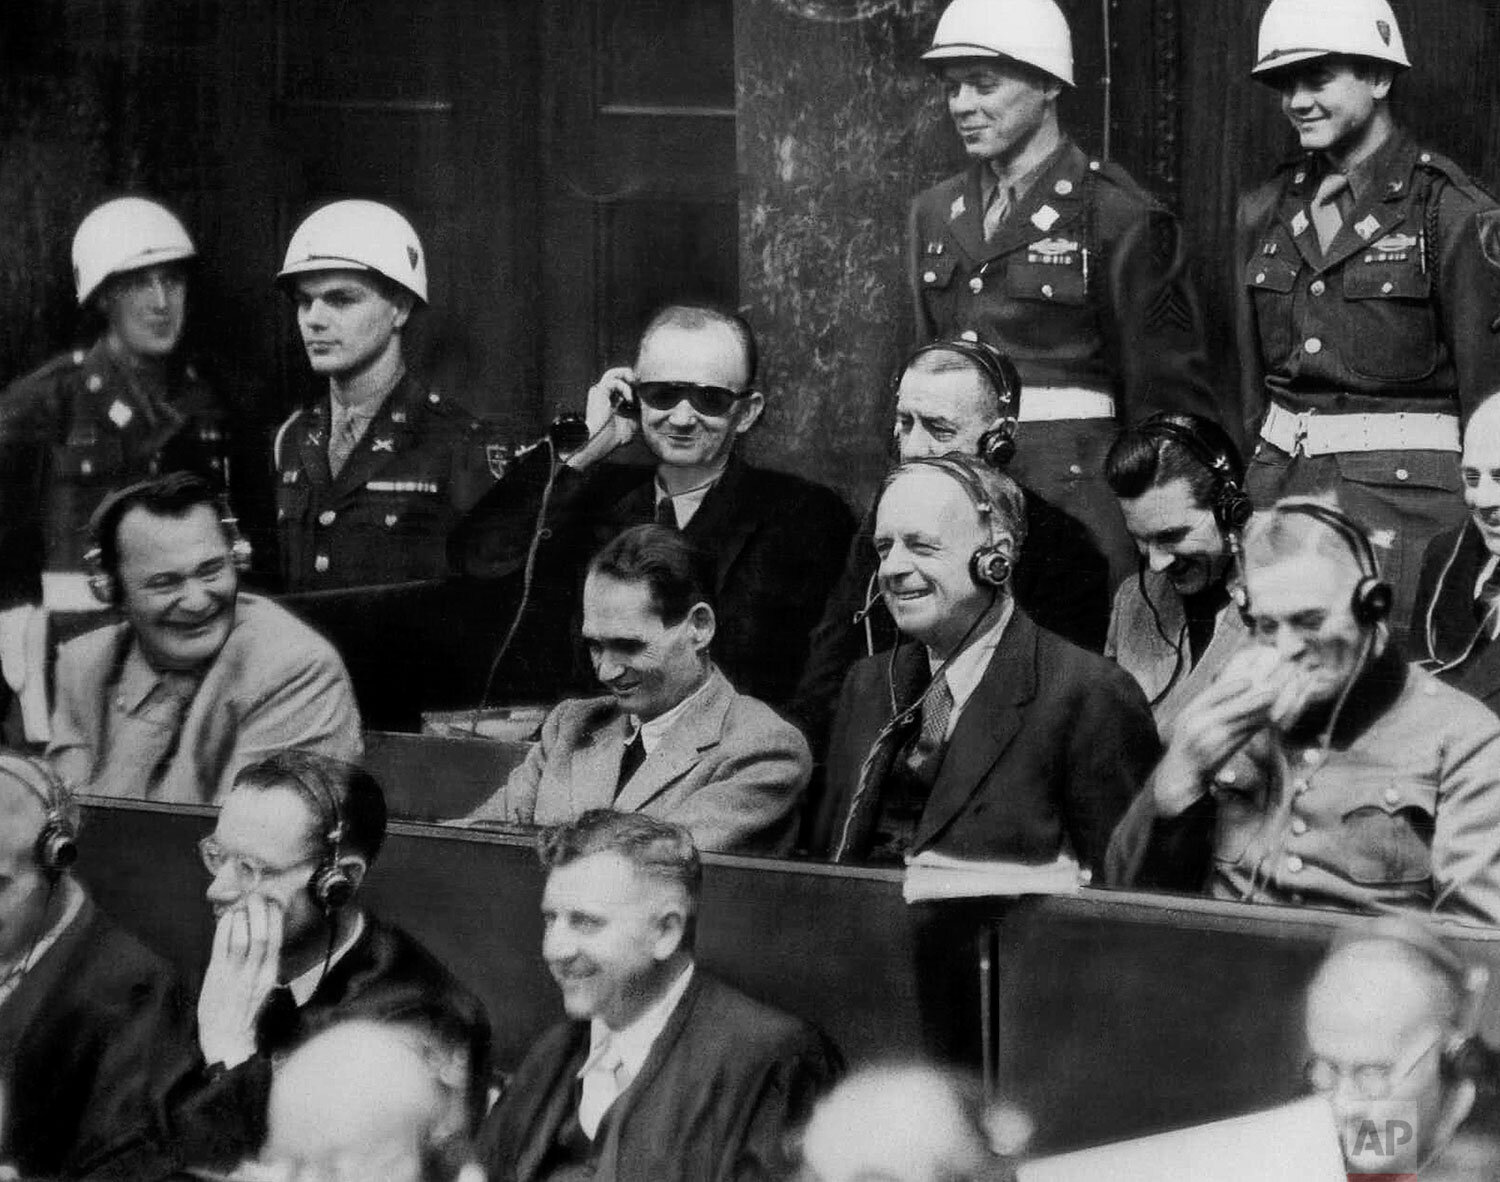  With Hermann Goering, left, getting the biggest laugh out of the proceeding, Nazi war criminals break out into laughter as evidence is introduced at Nuremberg, Germany on Nov. 30, 1945. Even the American guards enjoy the ‘joke.’ In the front row of 